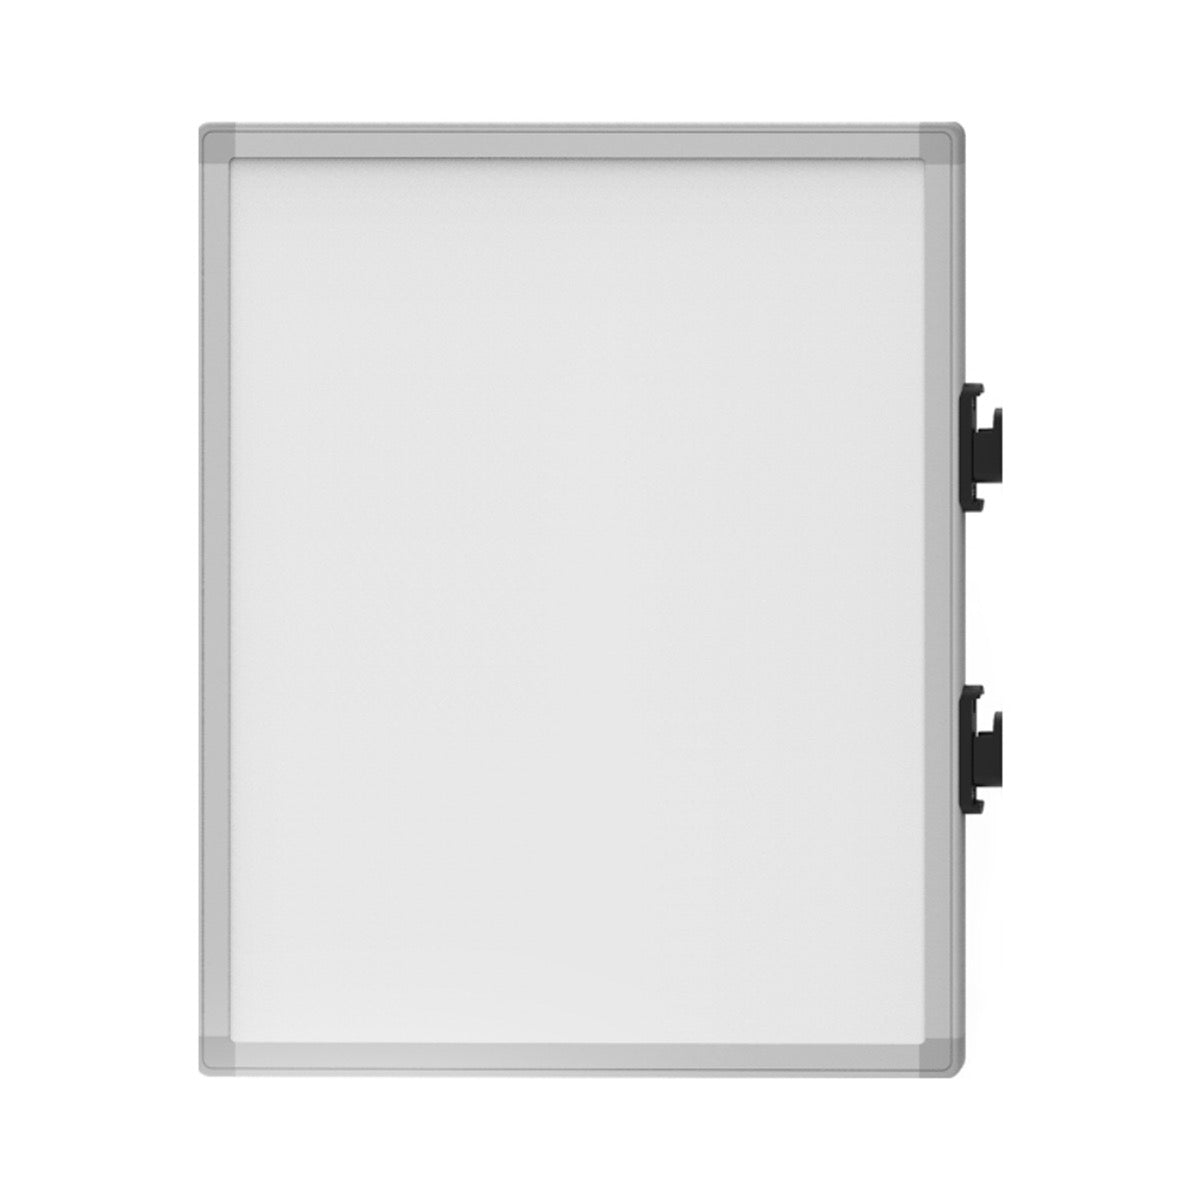 82"W x 76"H Mobile Whiteboard - Two-sided Magnetic Collaboration Station dry erase markerboard - Luxor COLLAB-STATION - SchoolOutlet